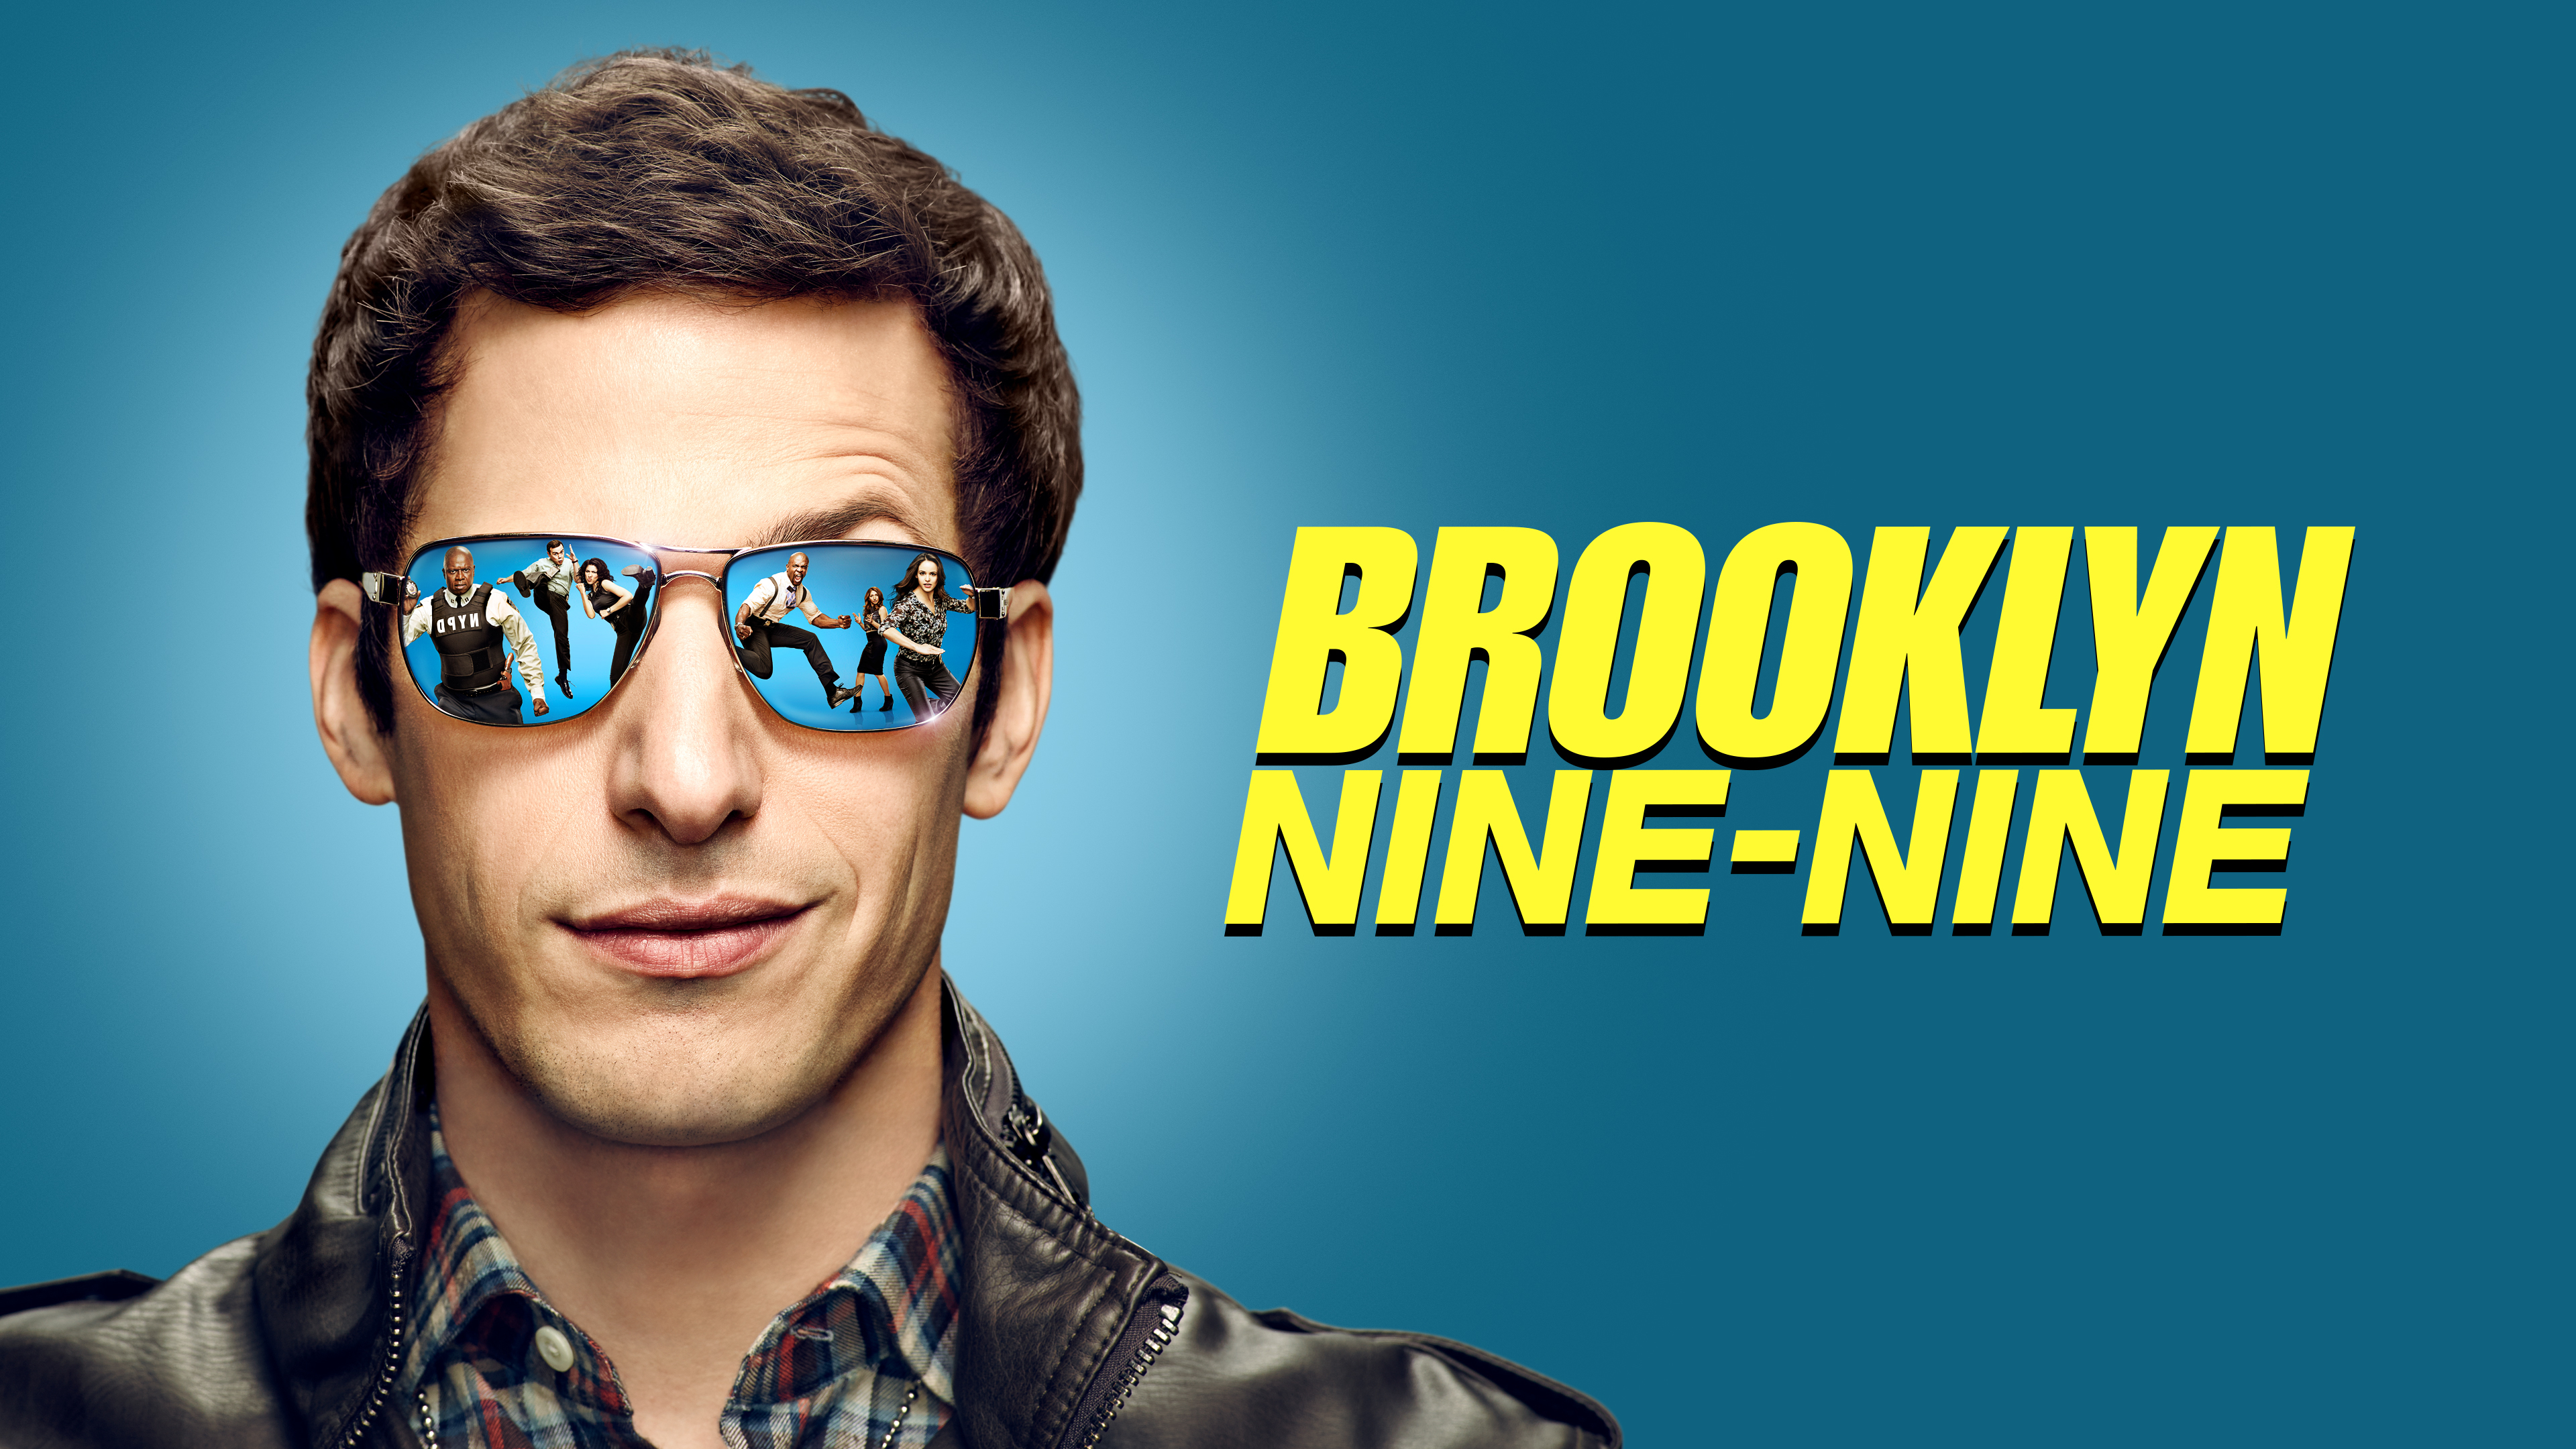 Brooklyn Nine-Nine Season 7 Netflix Release Date, Cast, Story and Other Streaming Platforms